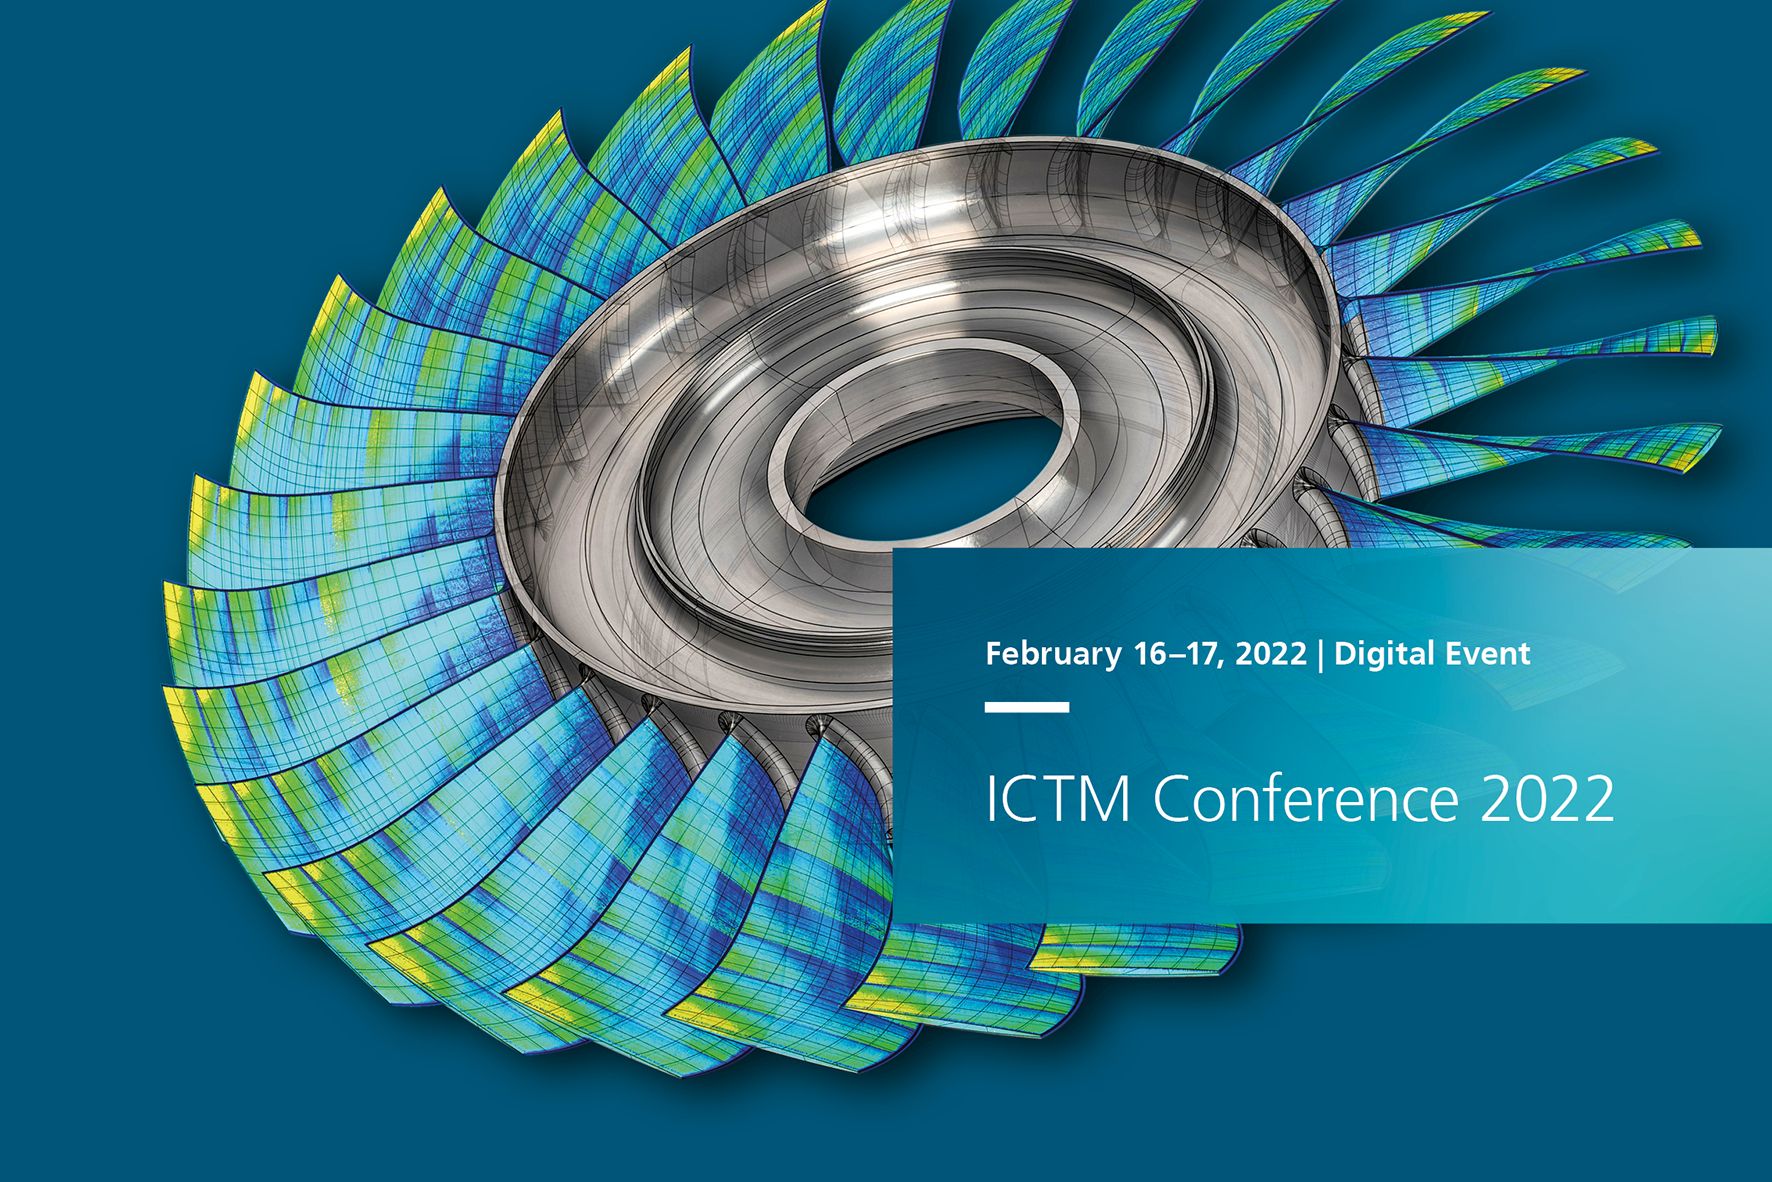 In order to achieve the specified goals of resource conservation and compliance with emission targets, companies need new approaches along the entire life cycle. How this can be achieved is the central question of the sixth ICTM Conference, which will take place digitally on February 16 and 17, 2022.